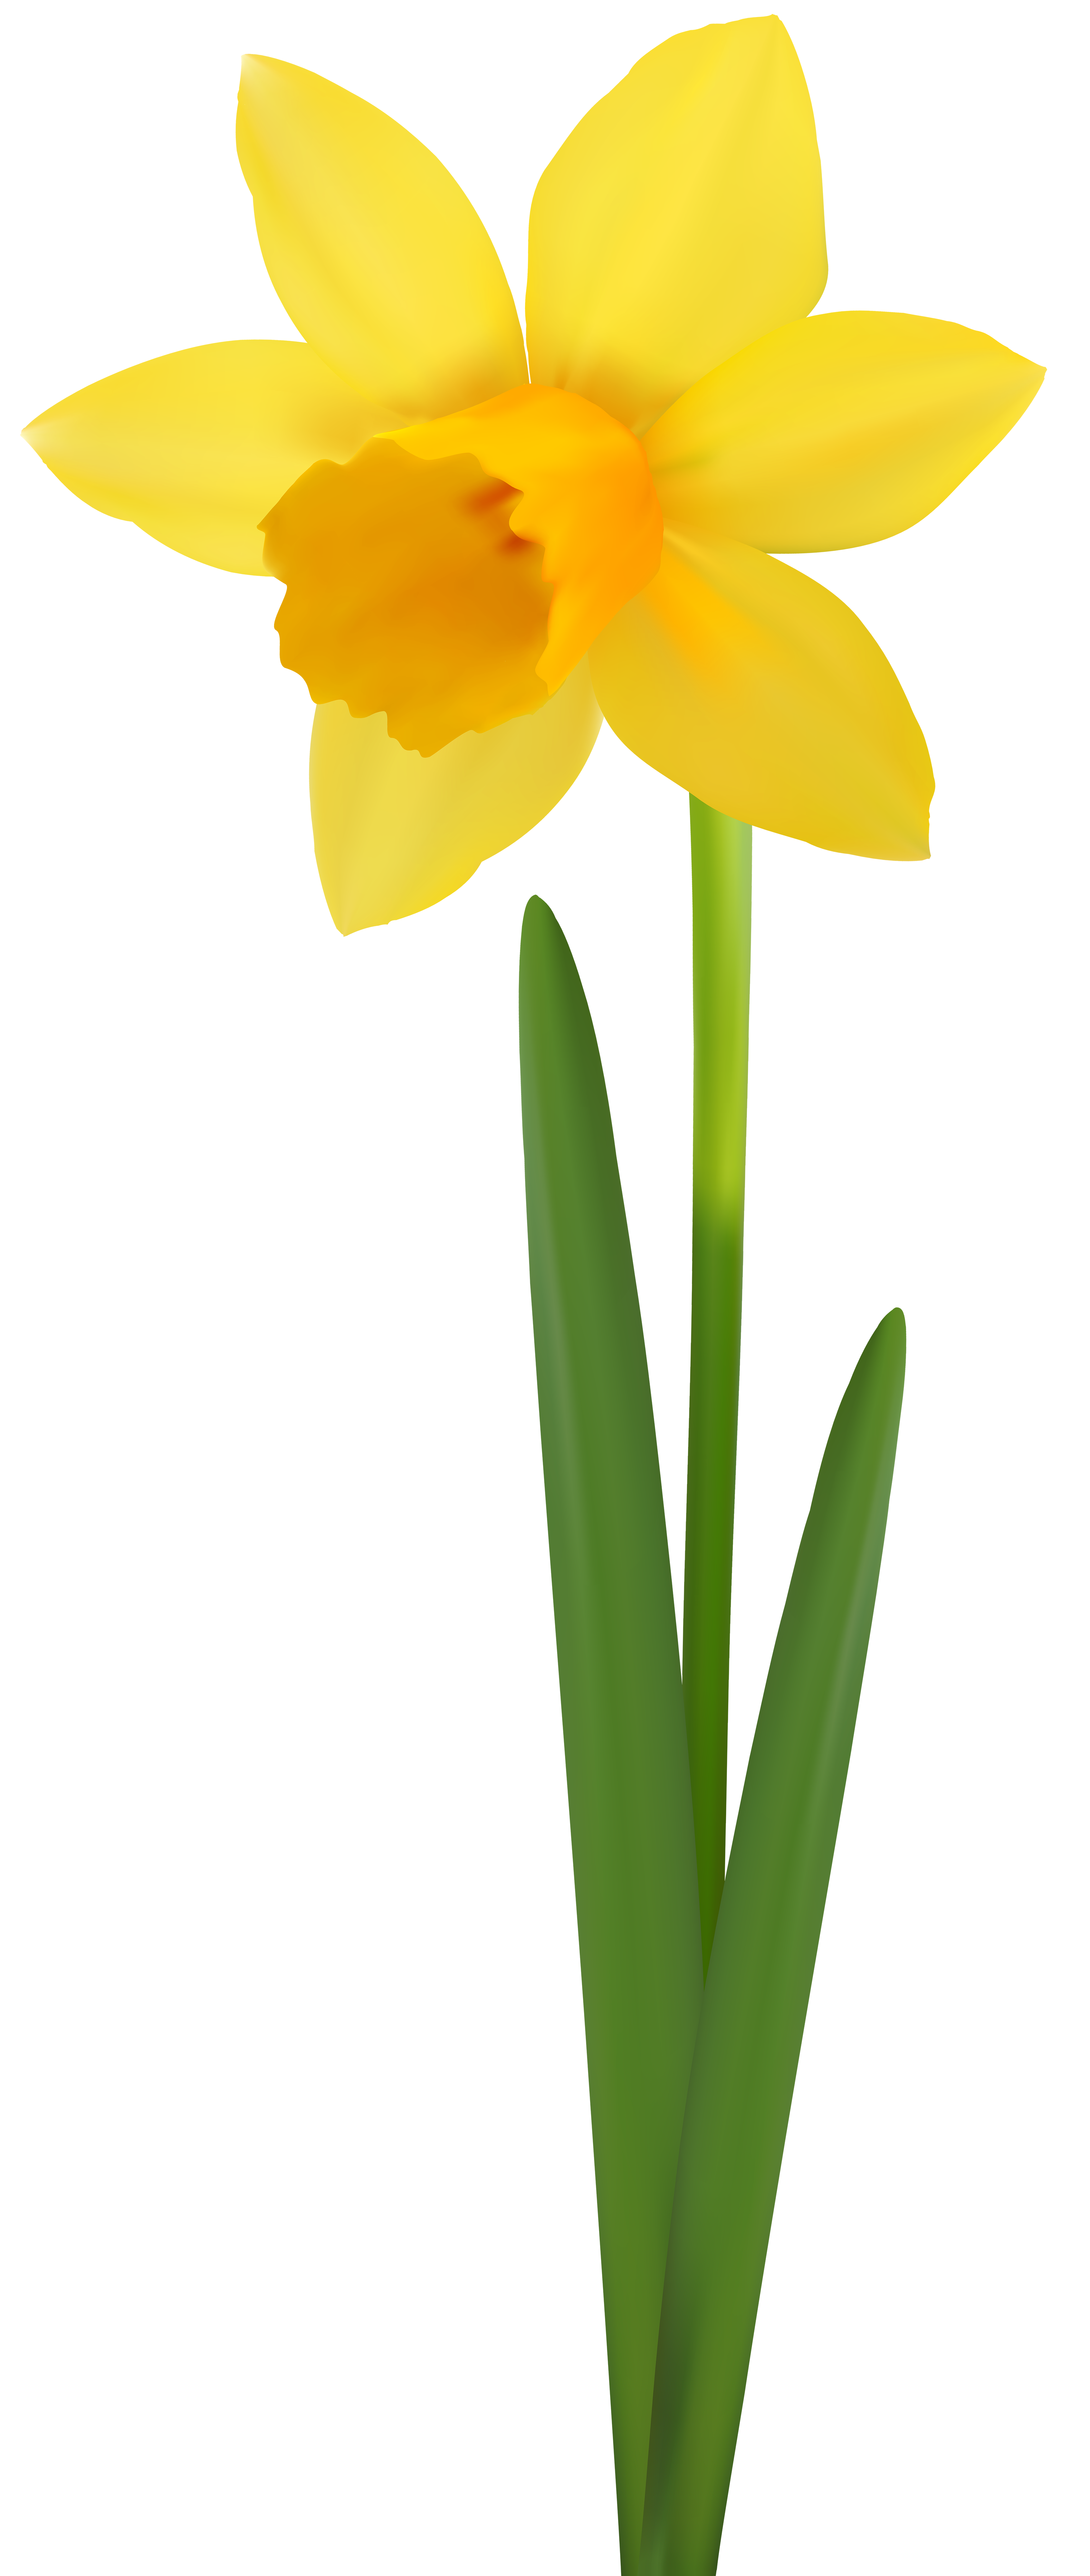 daffodil flower transparent image gallery yopriceville high quality images and transparent png free clipart gallery yopriceville